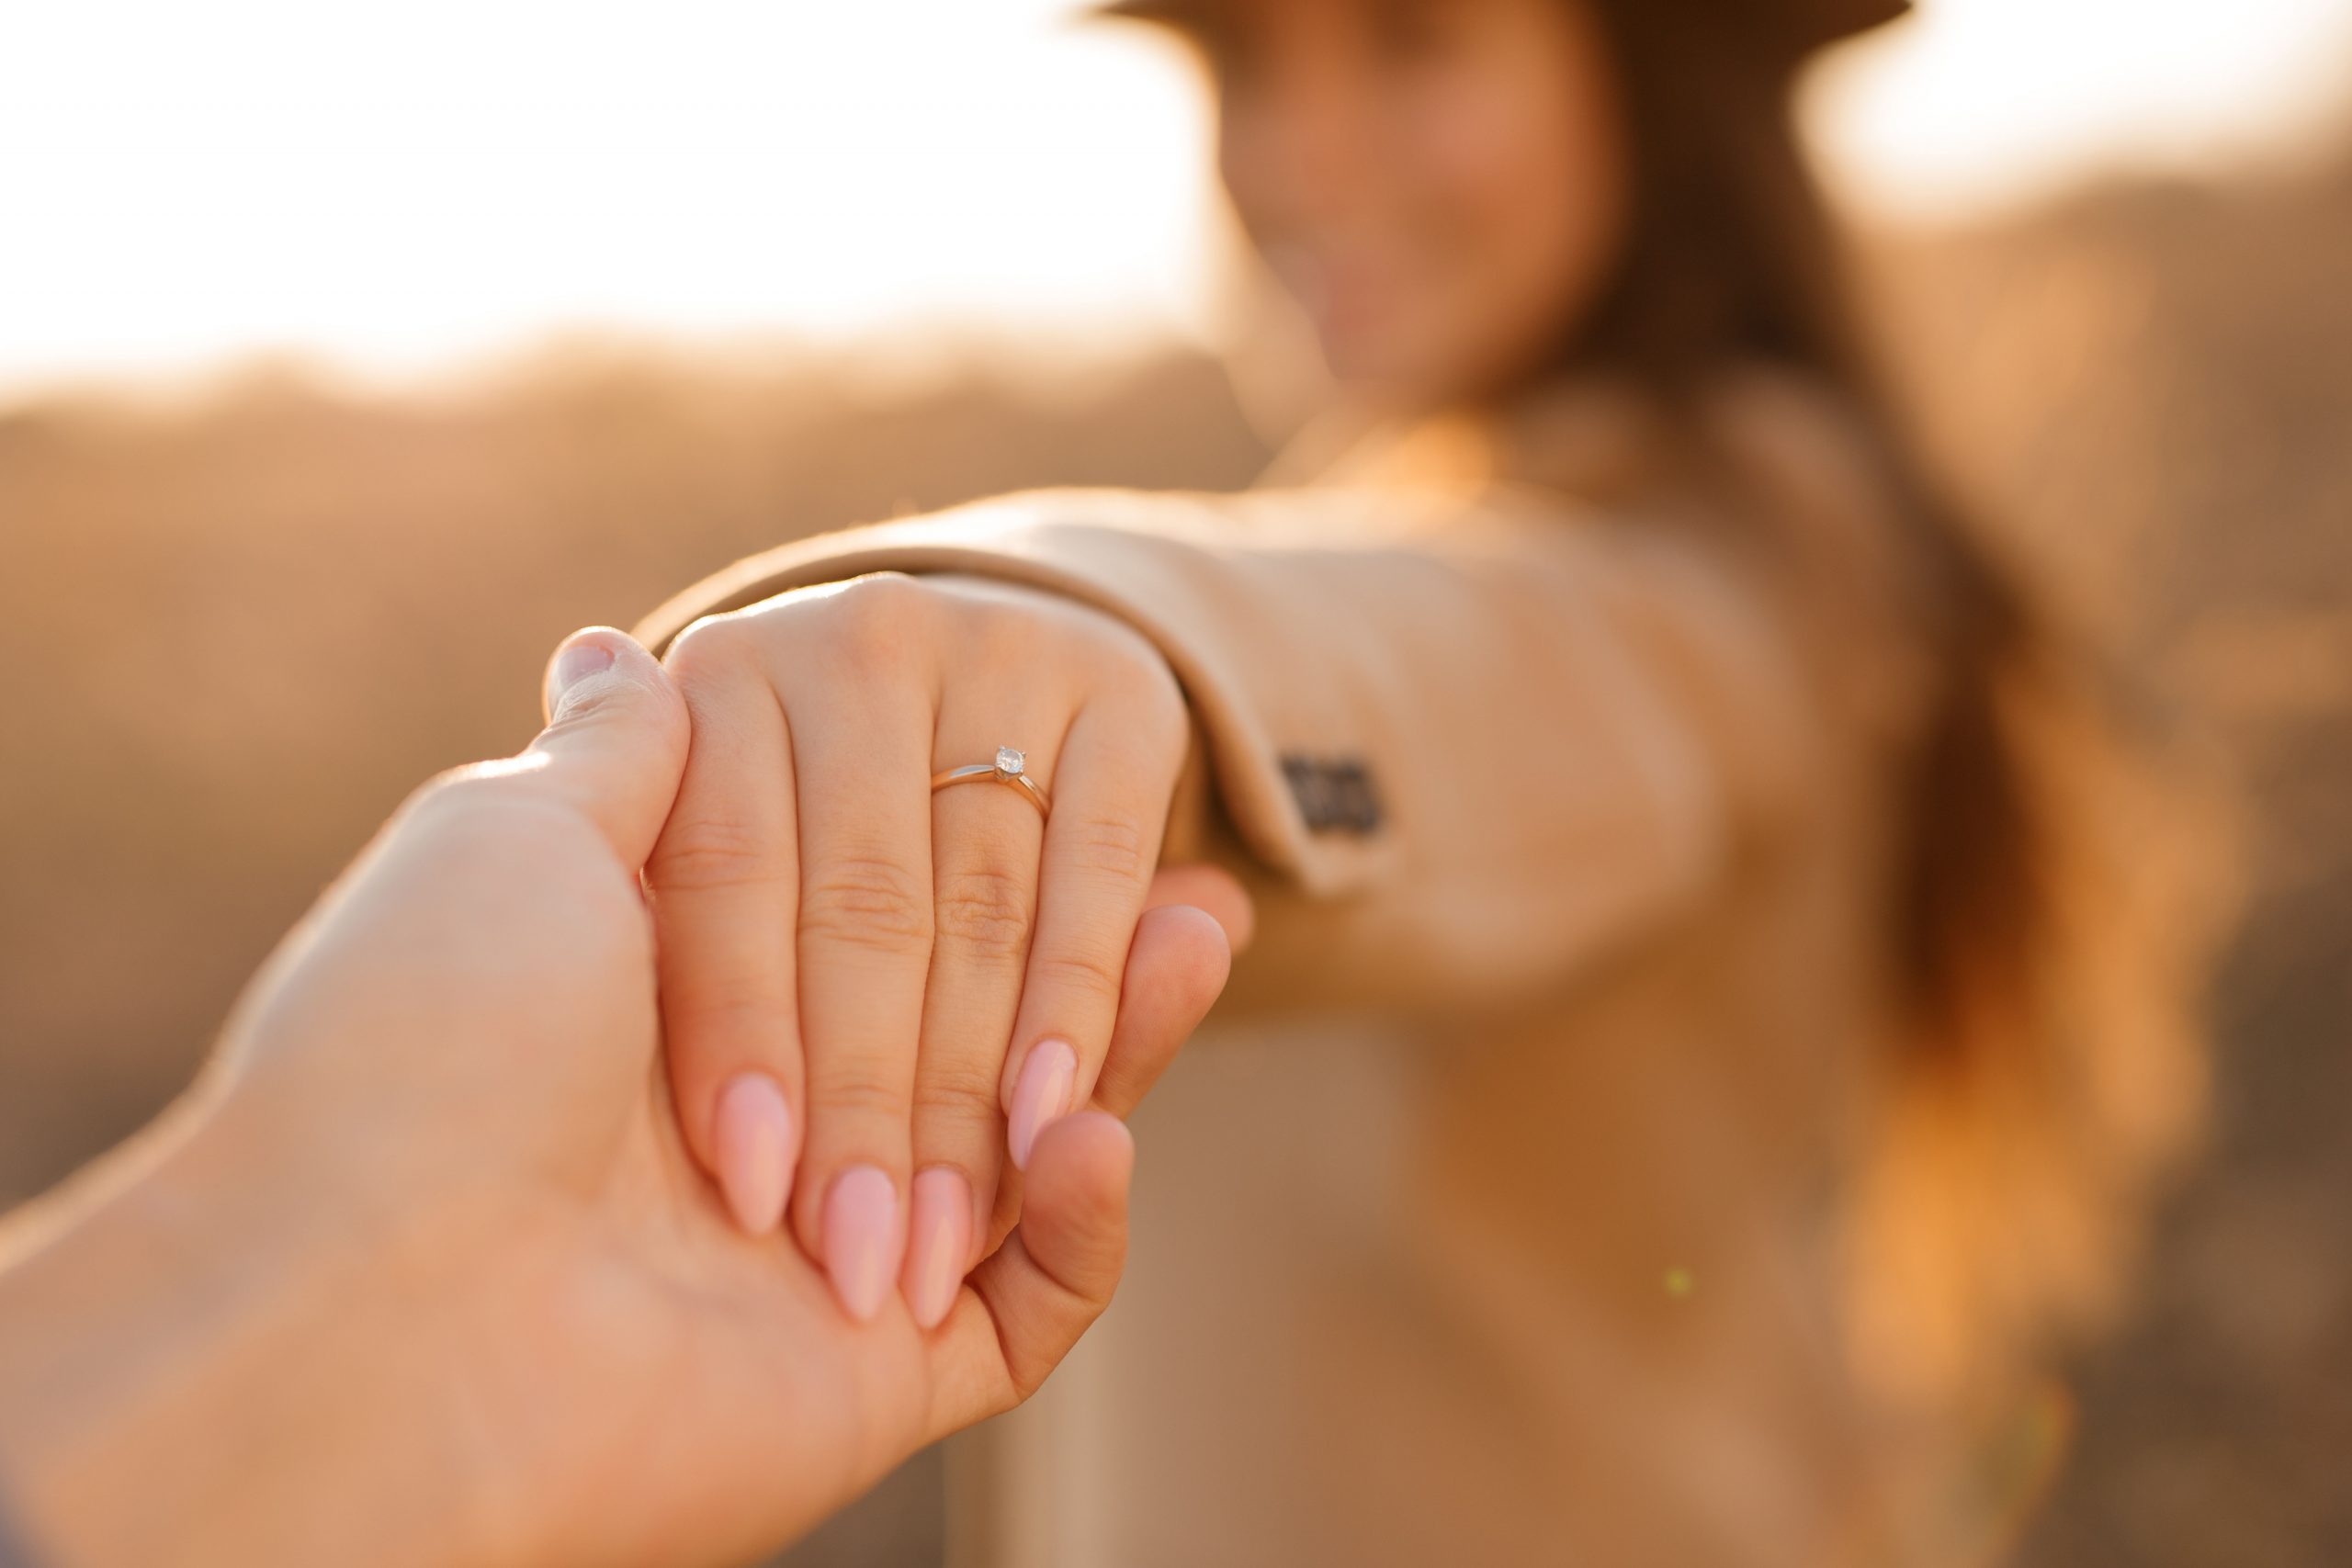 Lady holding her hand out with an engagement ring on her finger